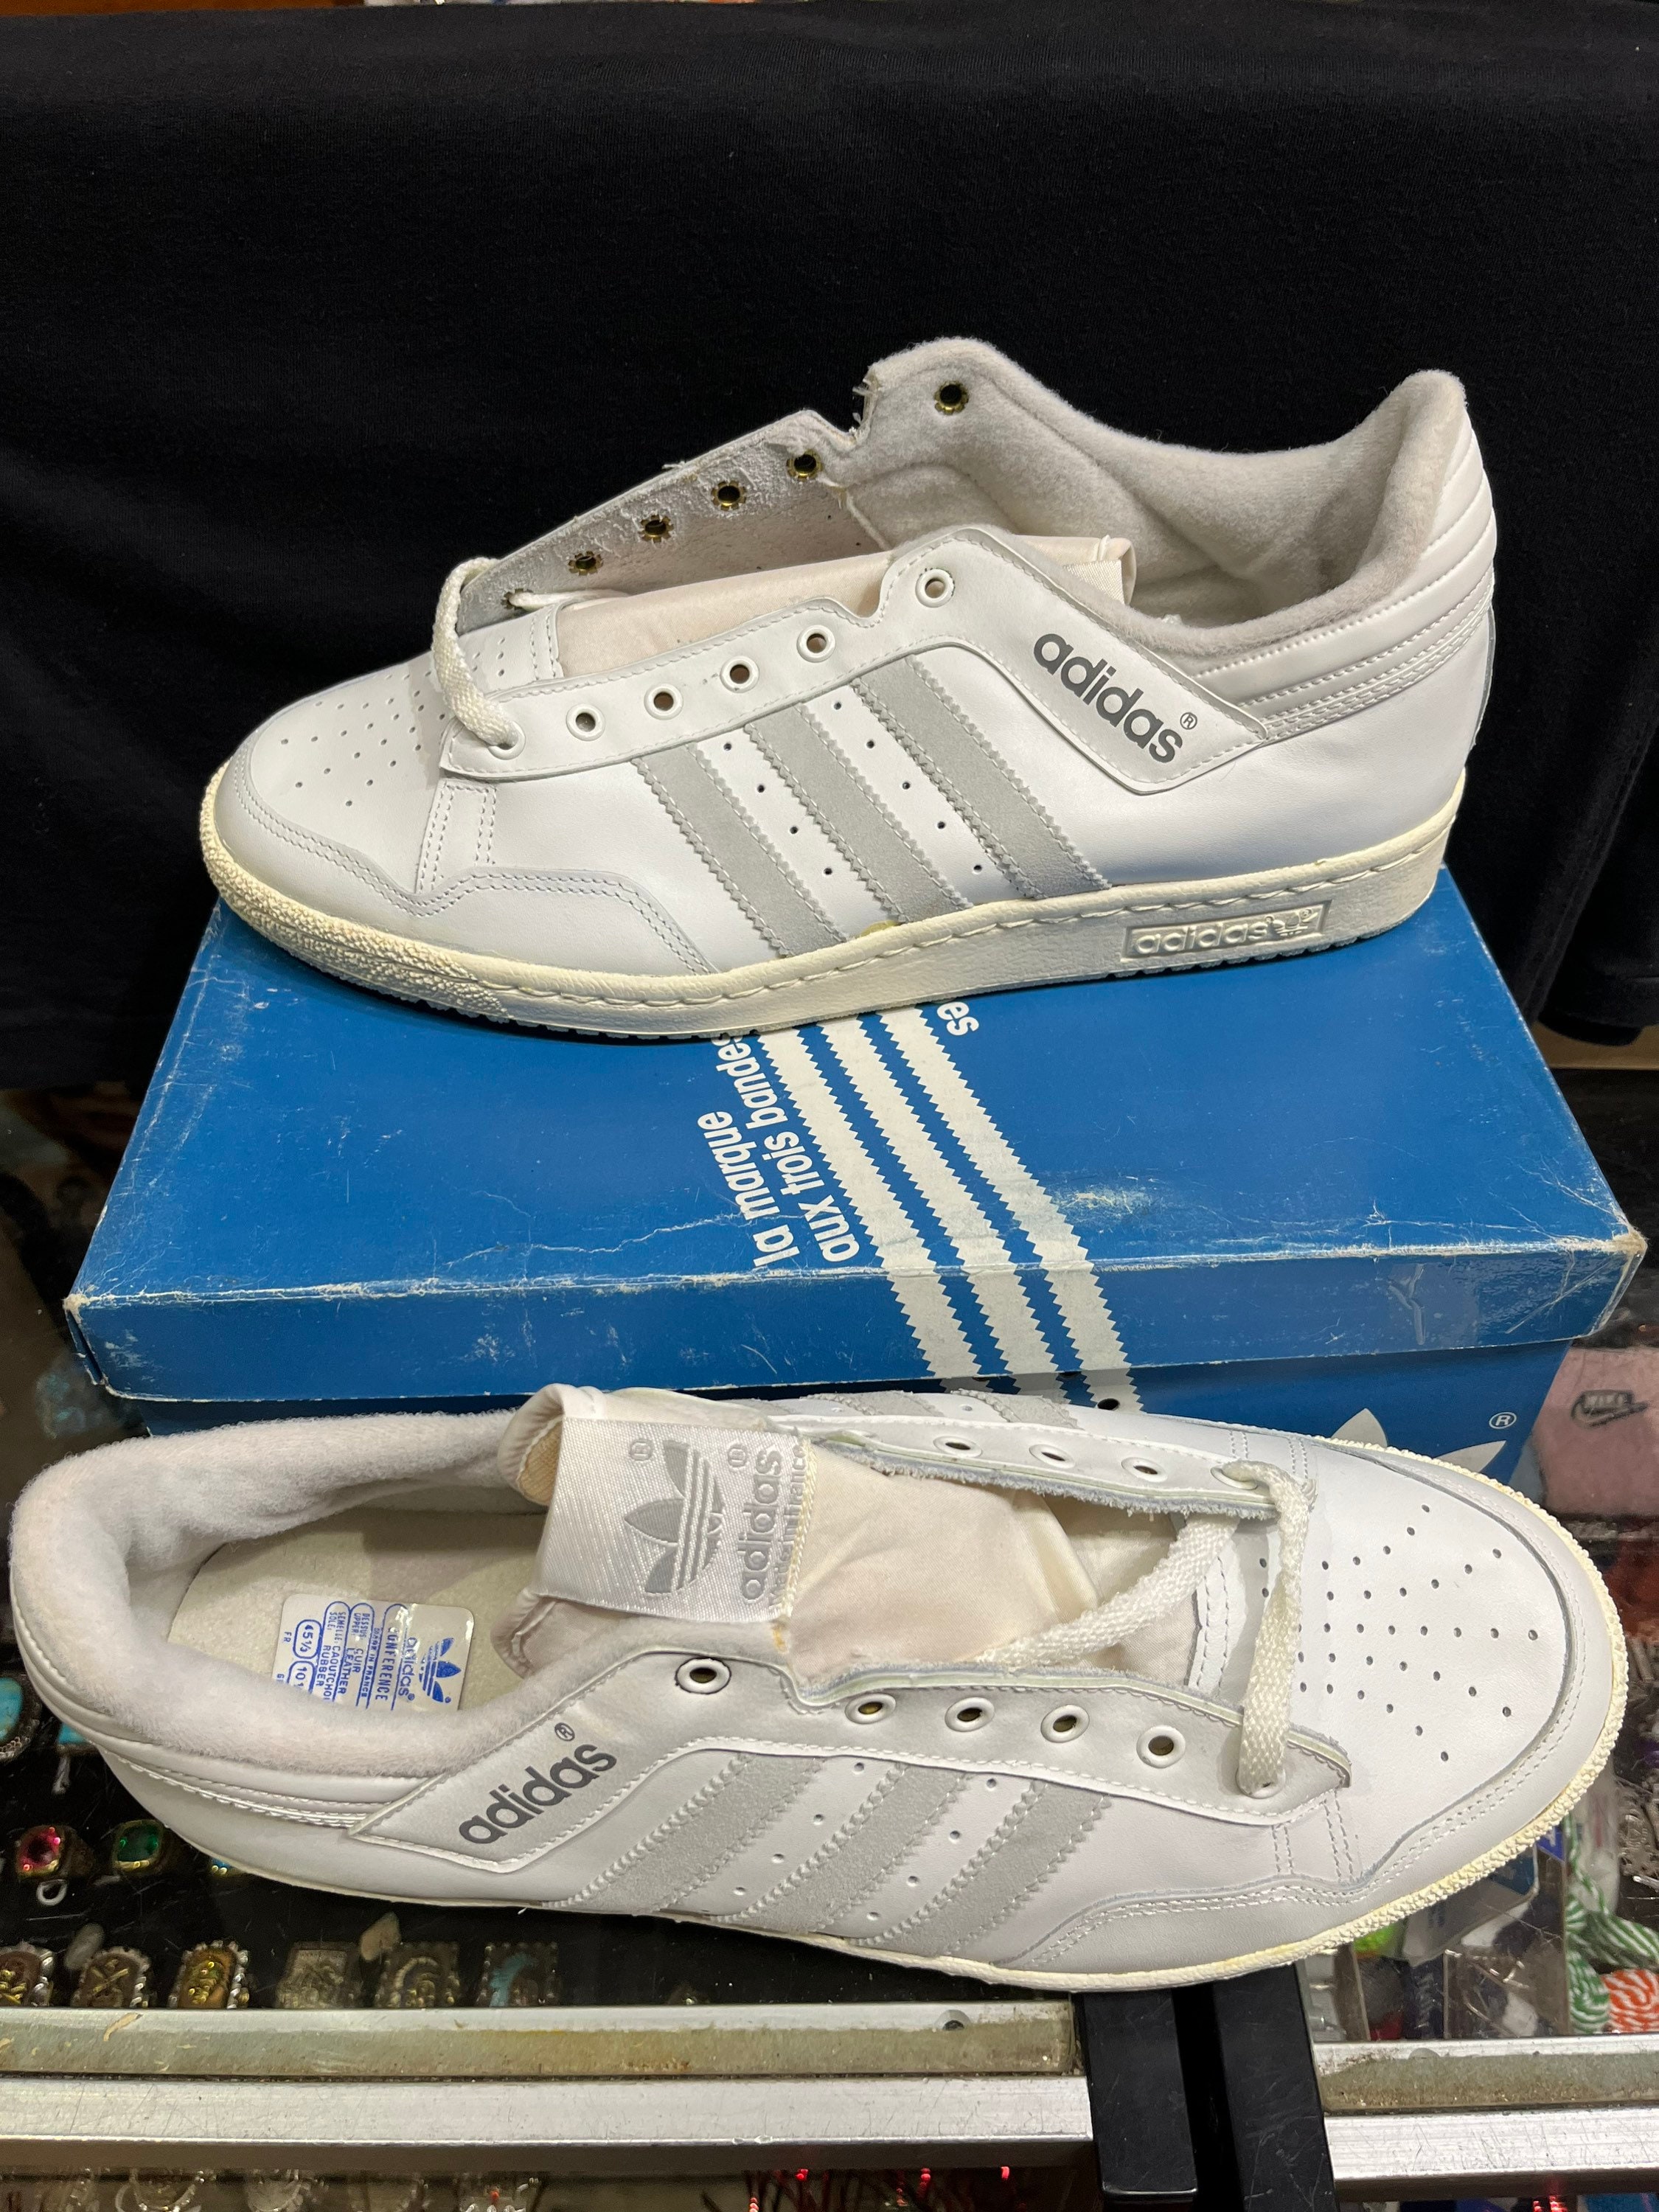 ADIDAS IVAN LENDL SUPREME Tennis Shoes Sneakers Vintage Rare Made In France